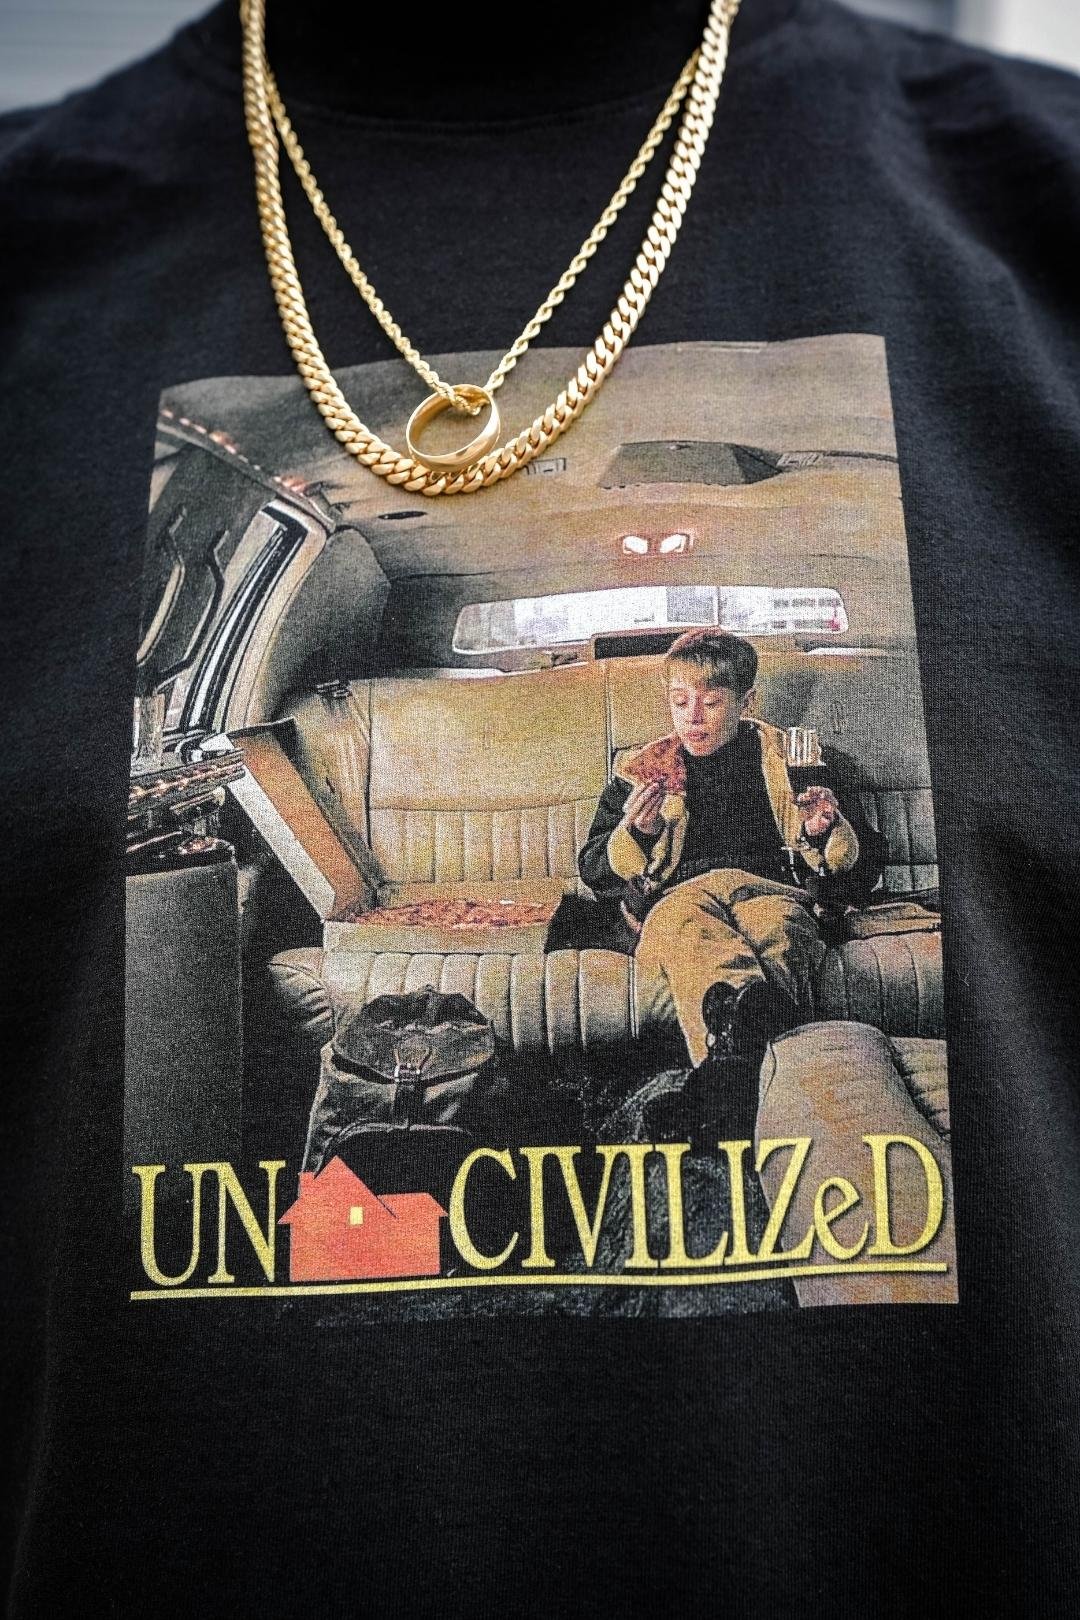 EARLY ACCESS: UNCIVILIZED "LIMO" T-SHIRT